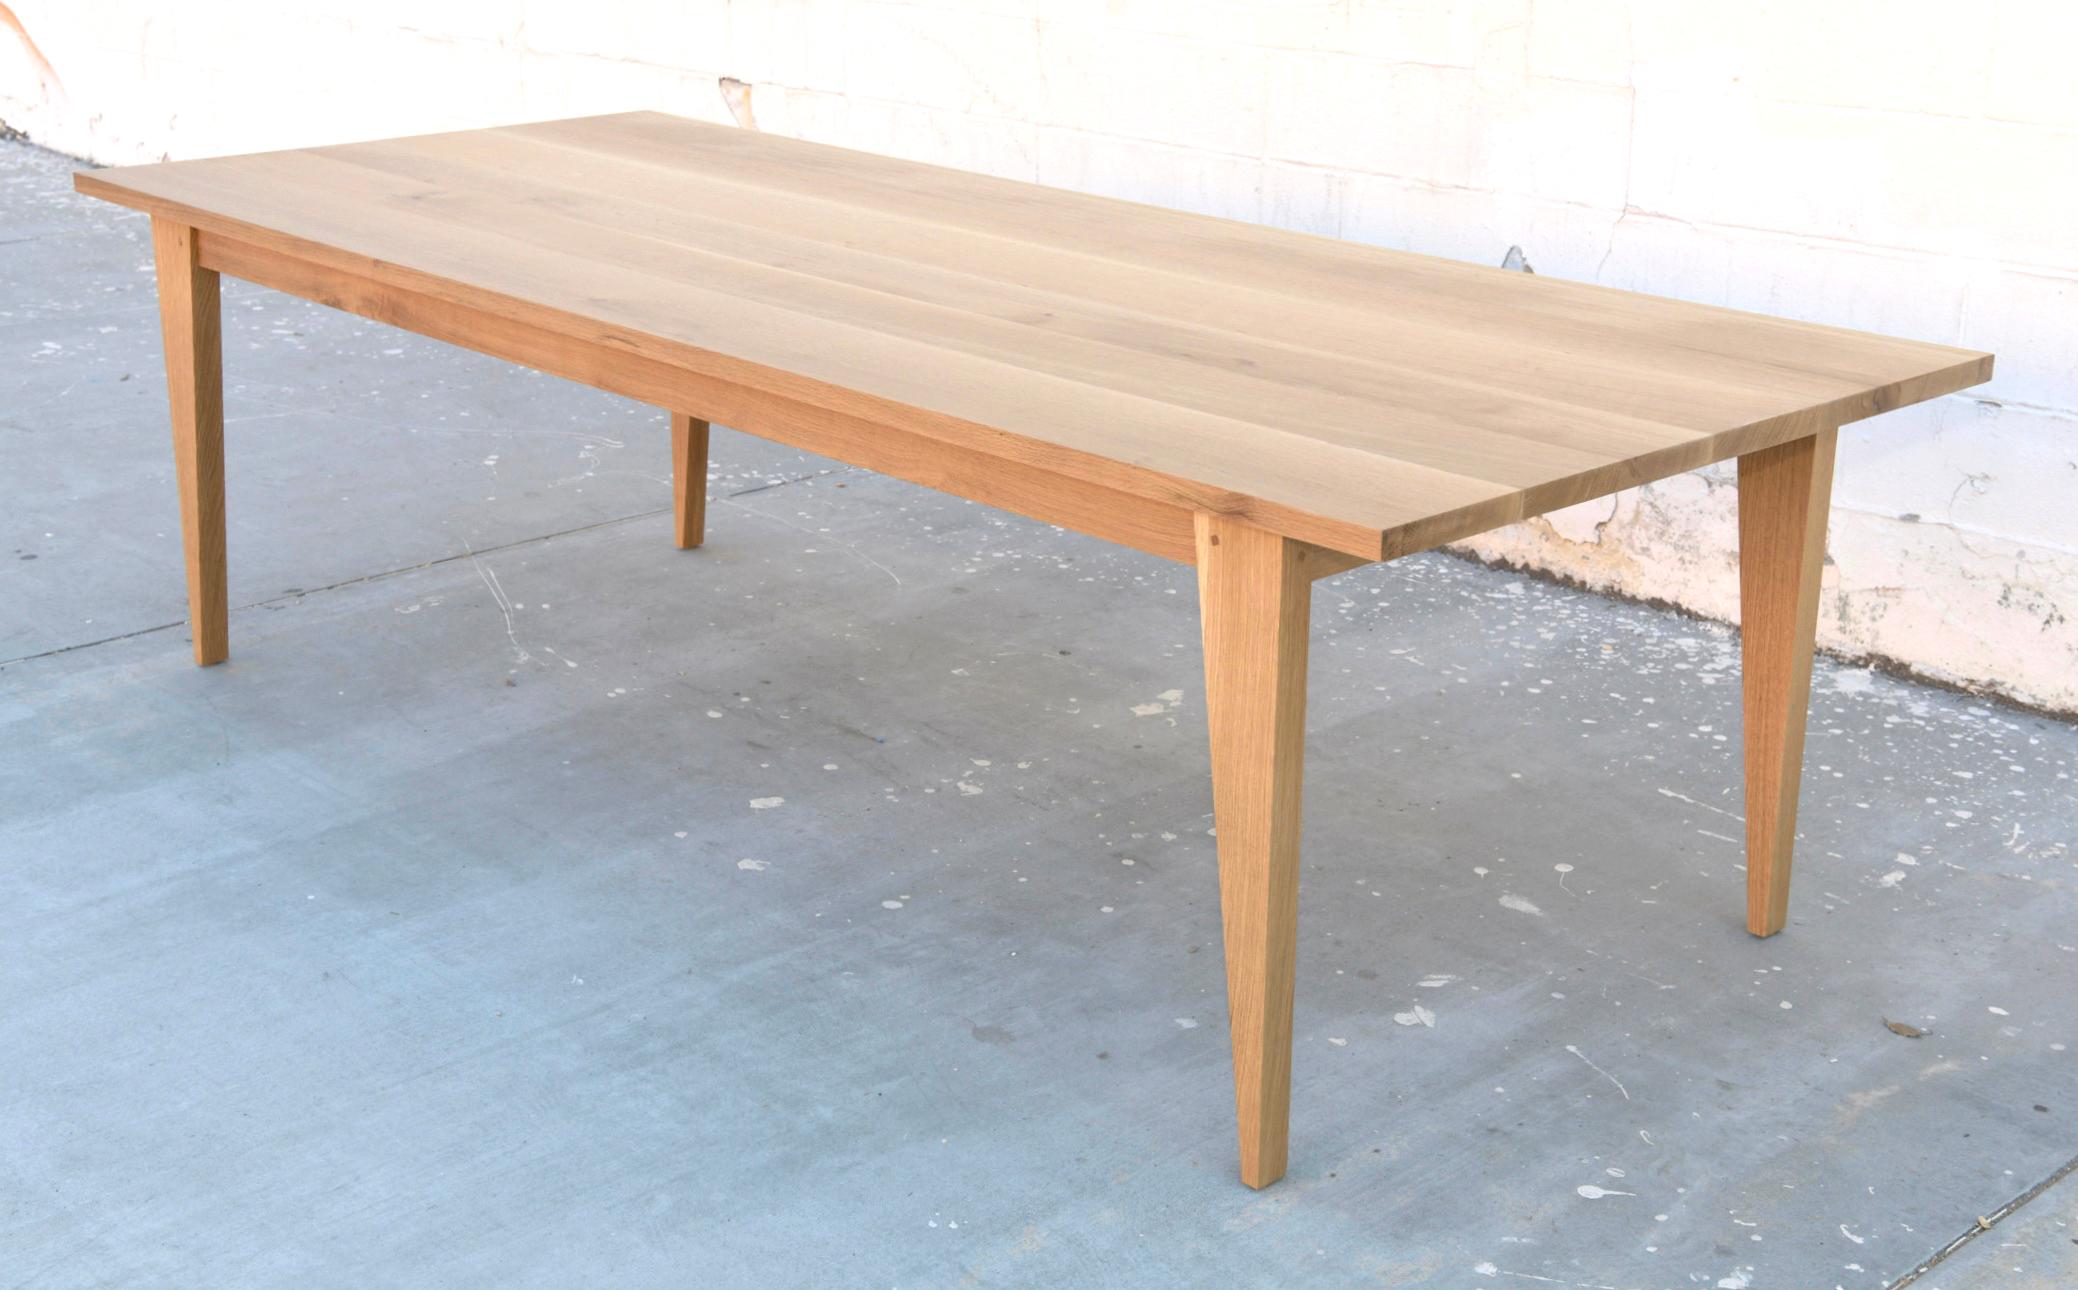 This custom dining table made from quarter sawn oak expands from 96